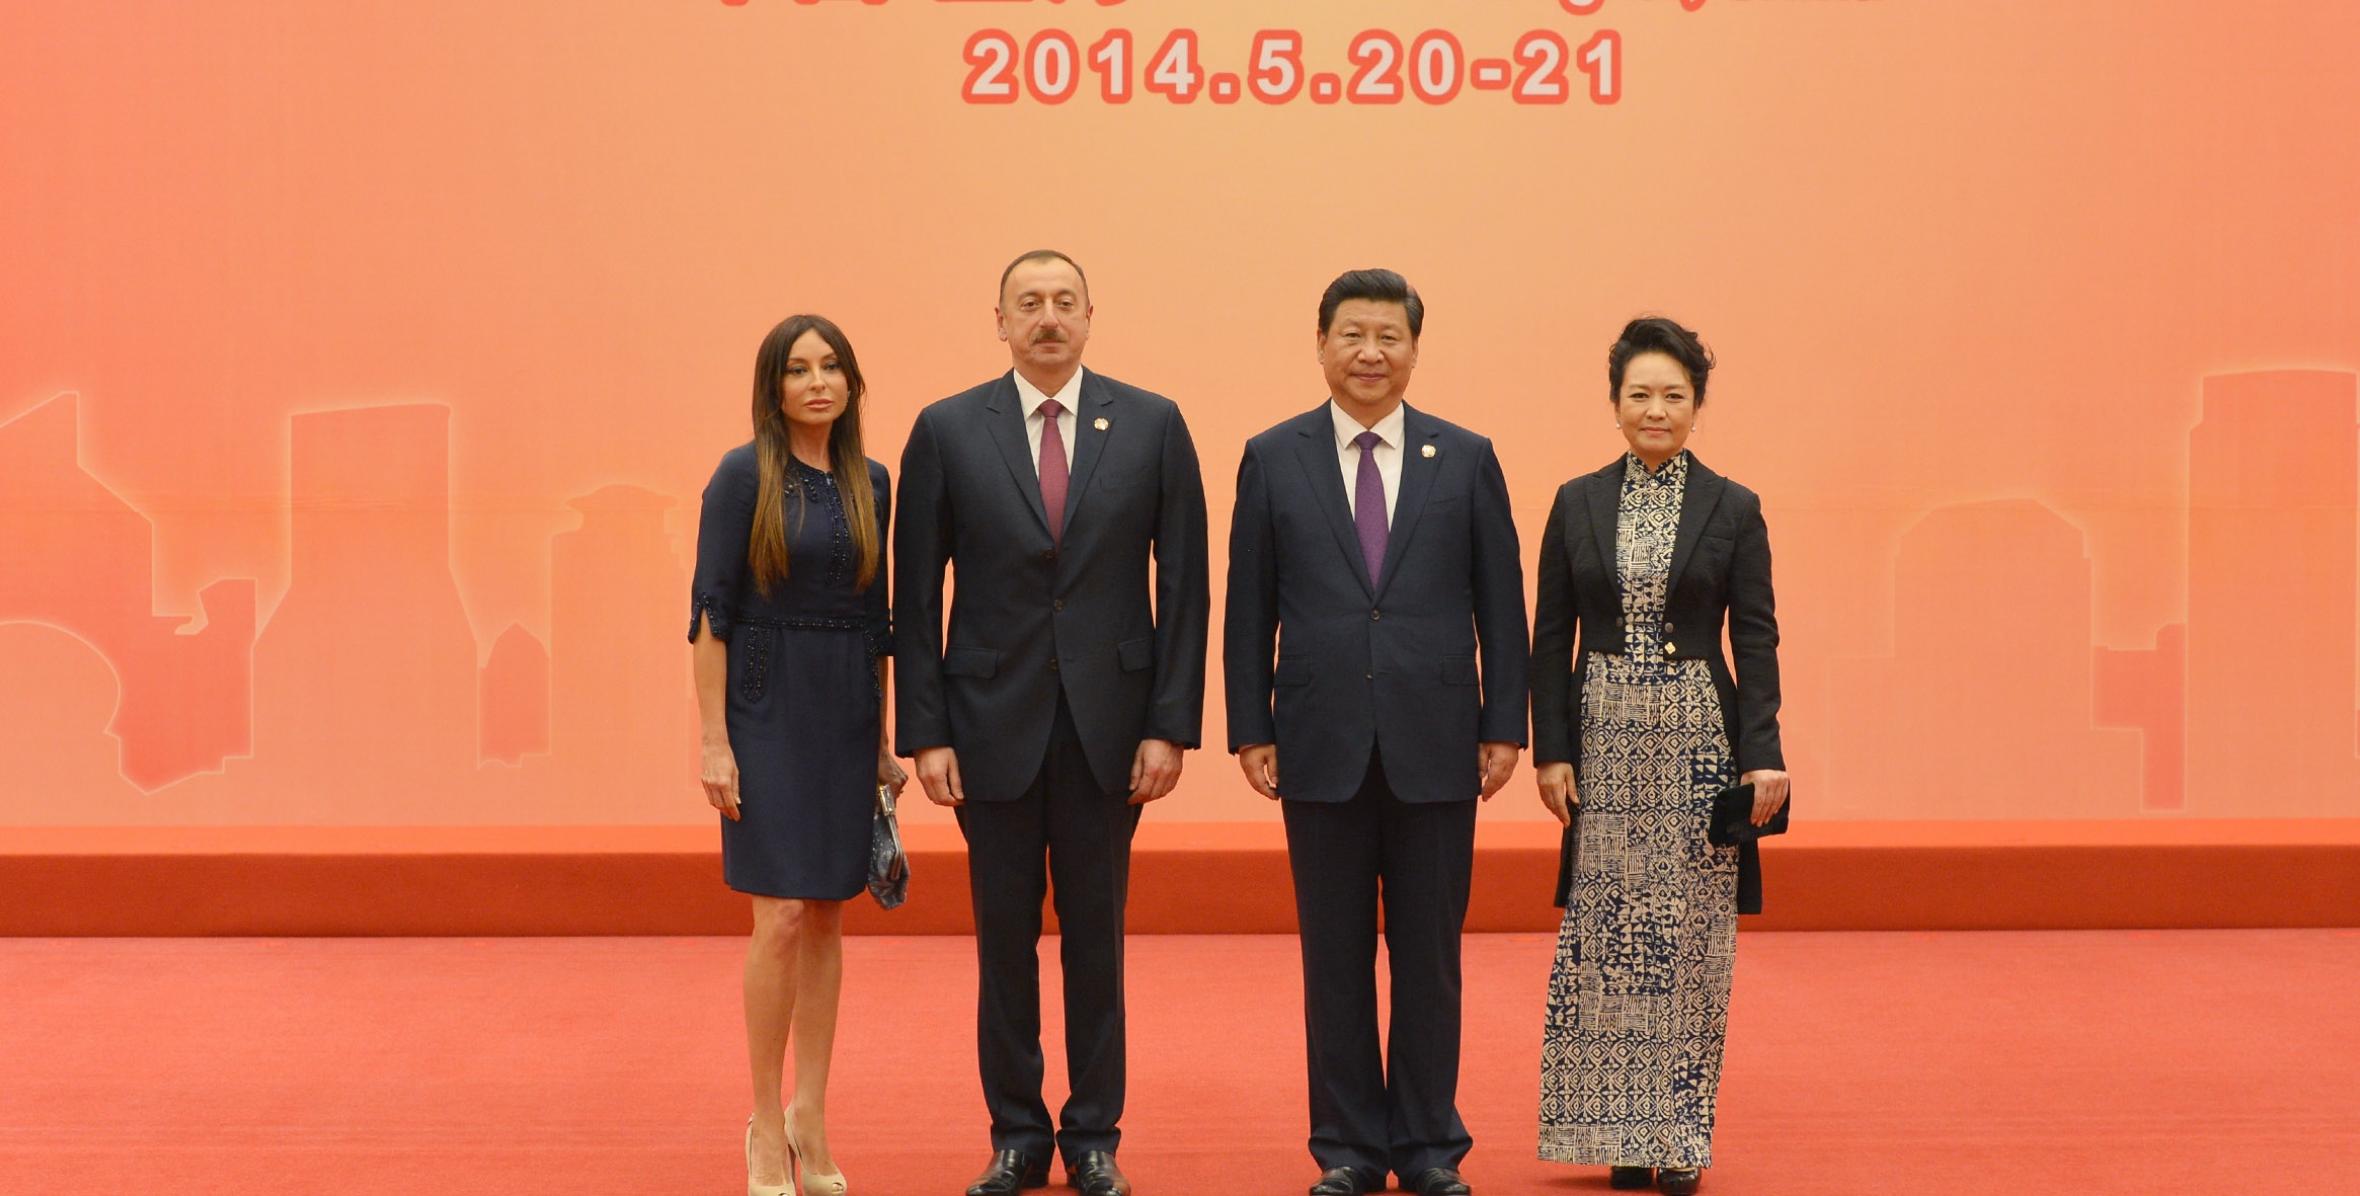 Ilham Aliyev attended a reception in honor of heads of state and government in Shanghai